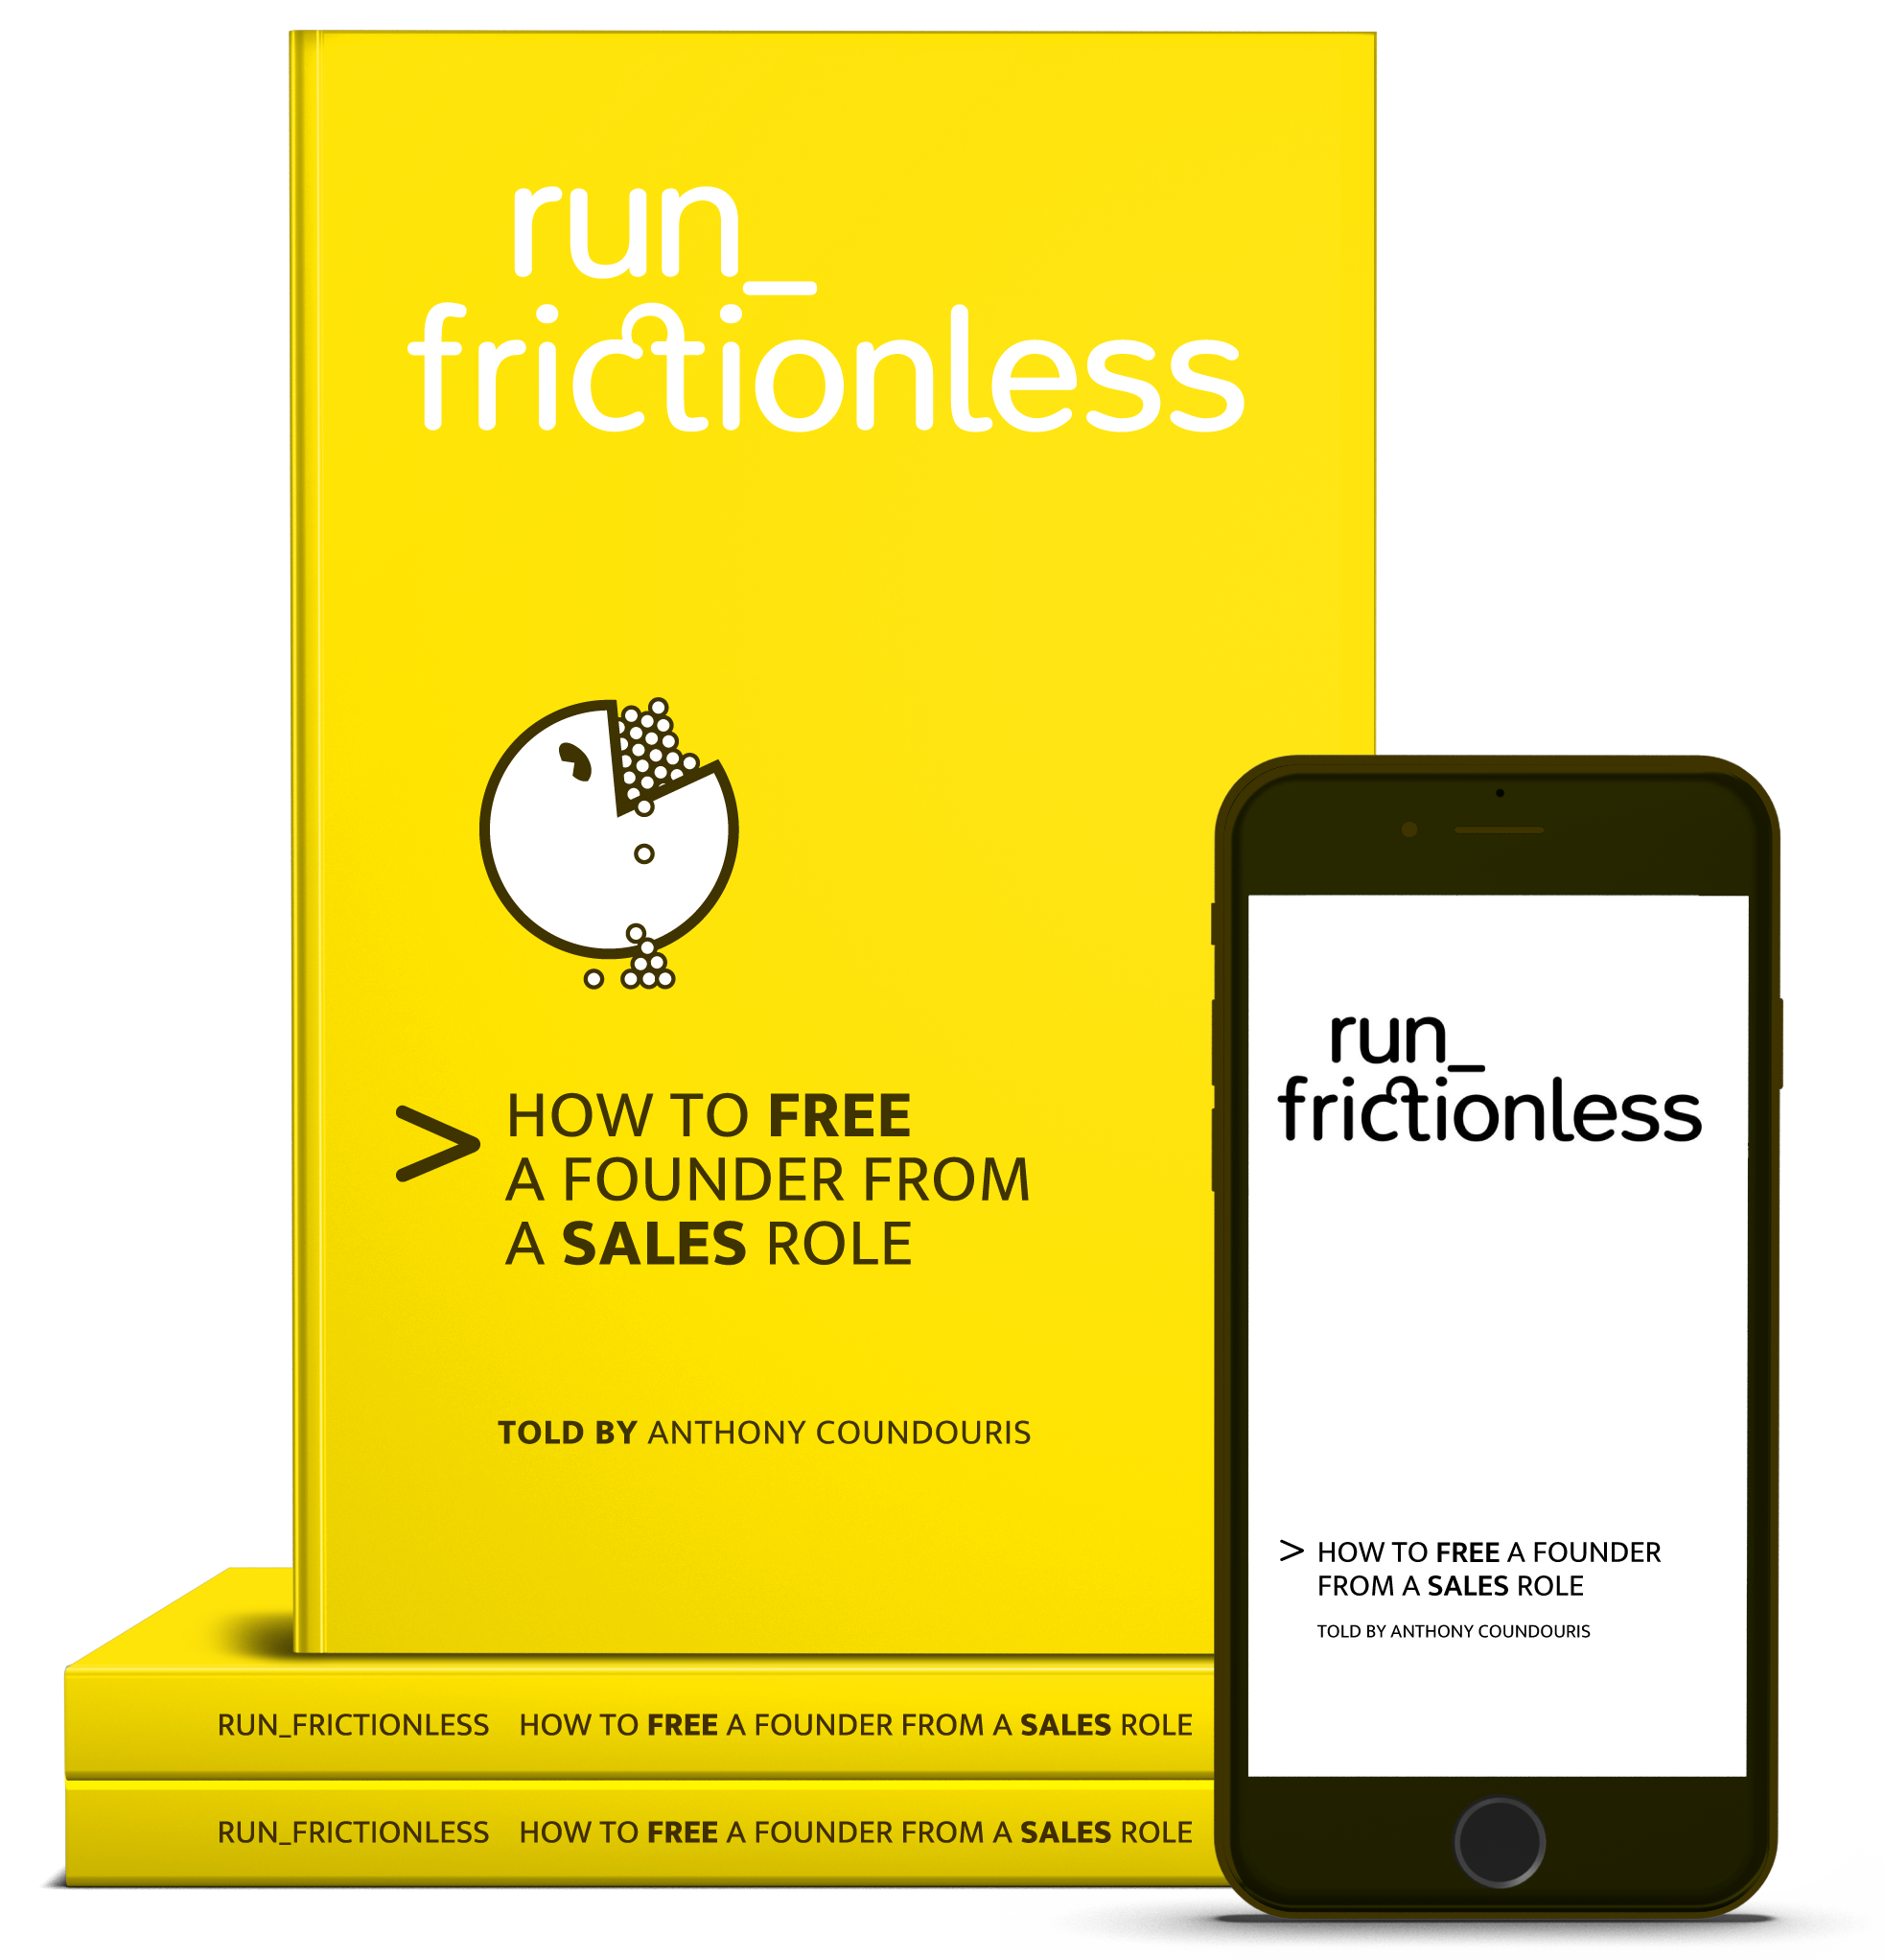 FREE: run_frictionless: How to free a founder from a sale role by Anthony Coundouris